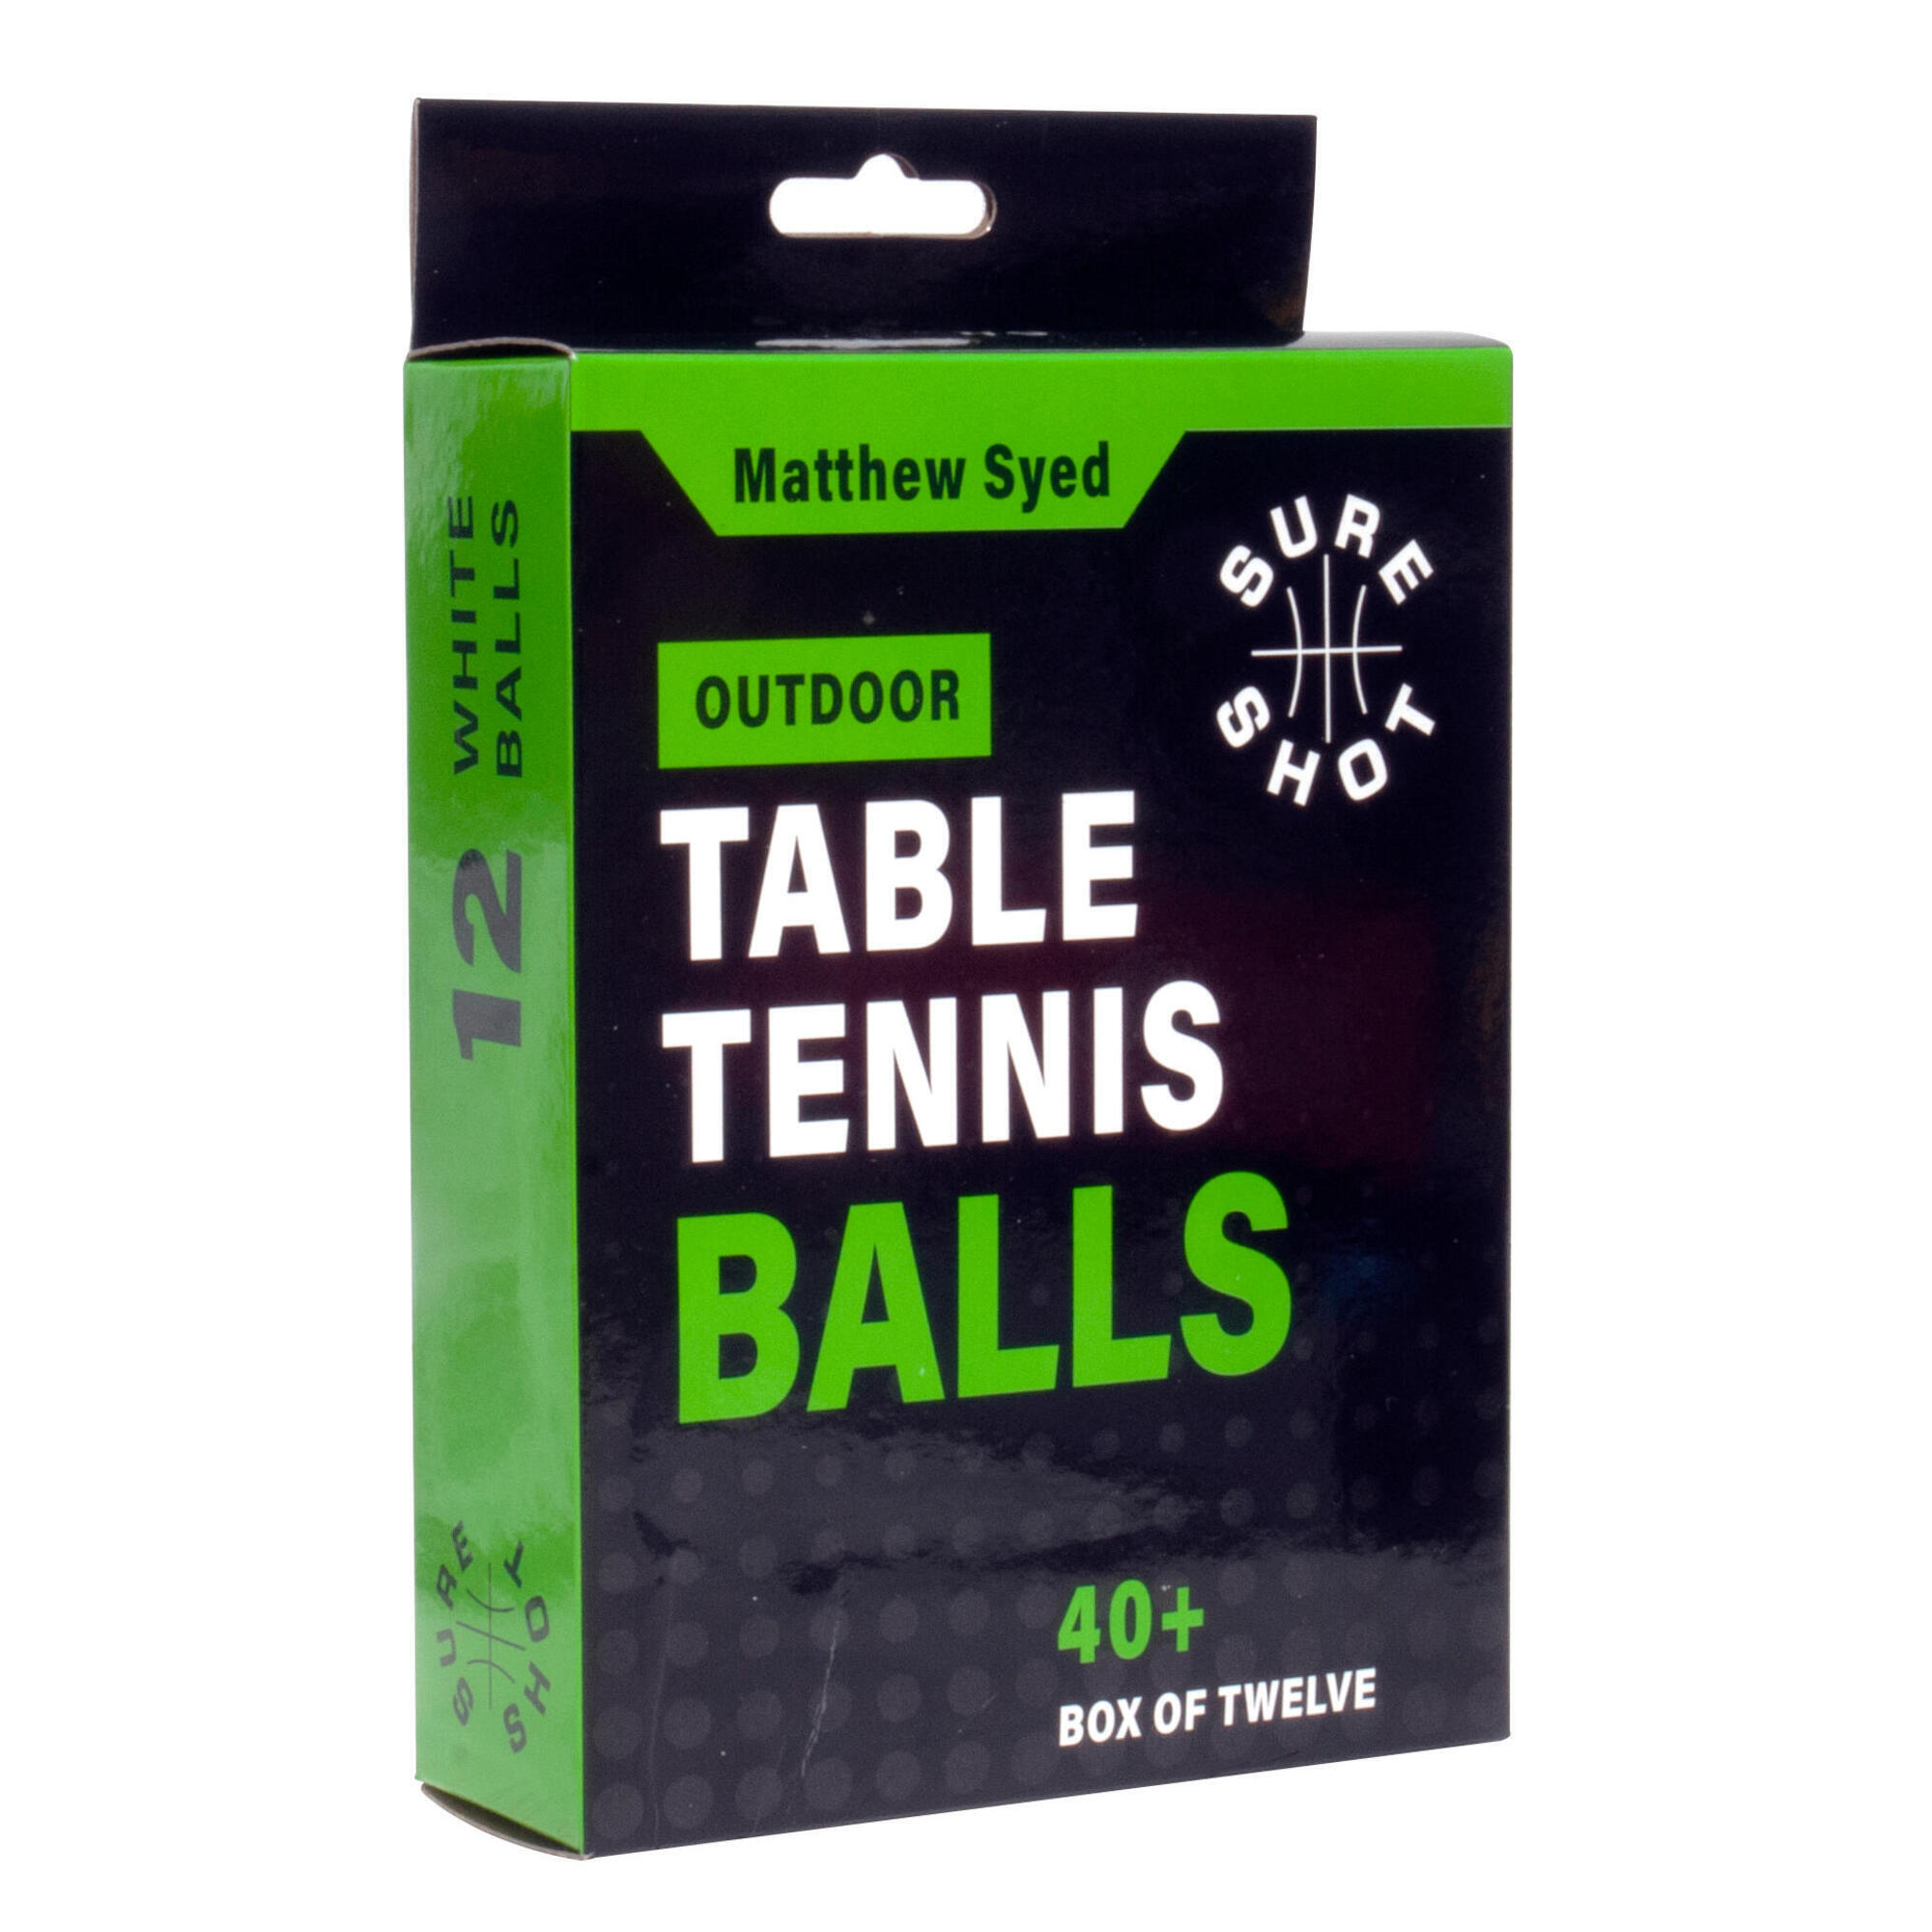 SURE SHOT Sure Shot Matthew Syed Outdoor Table Tennis Balls (Pack of 12)